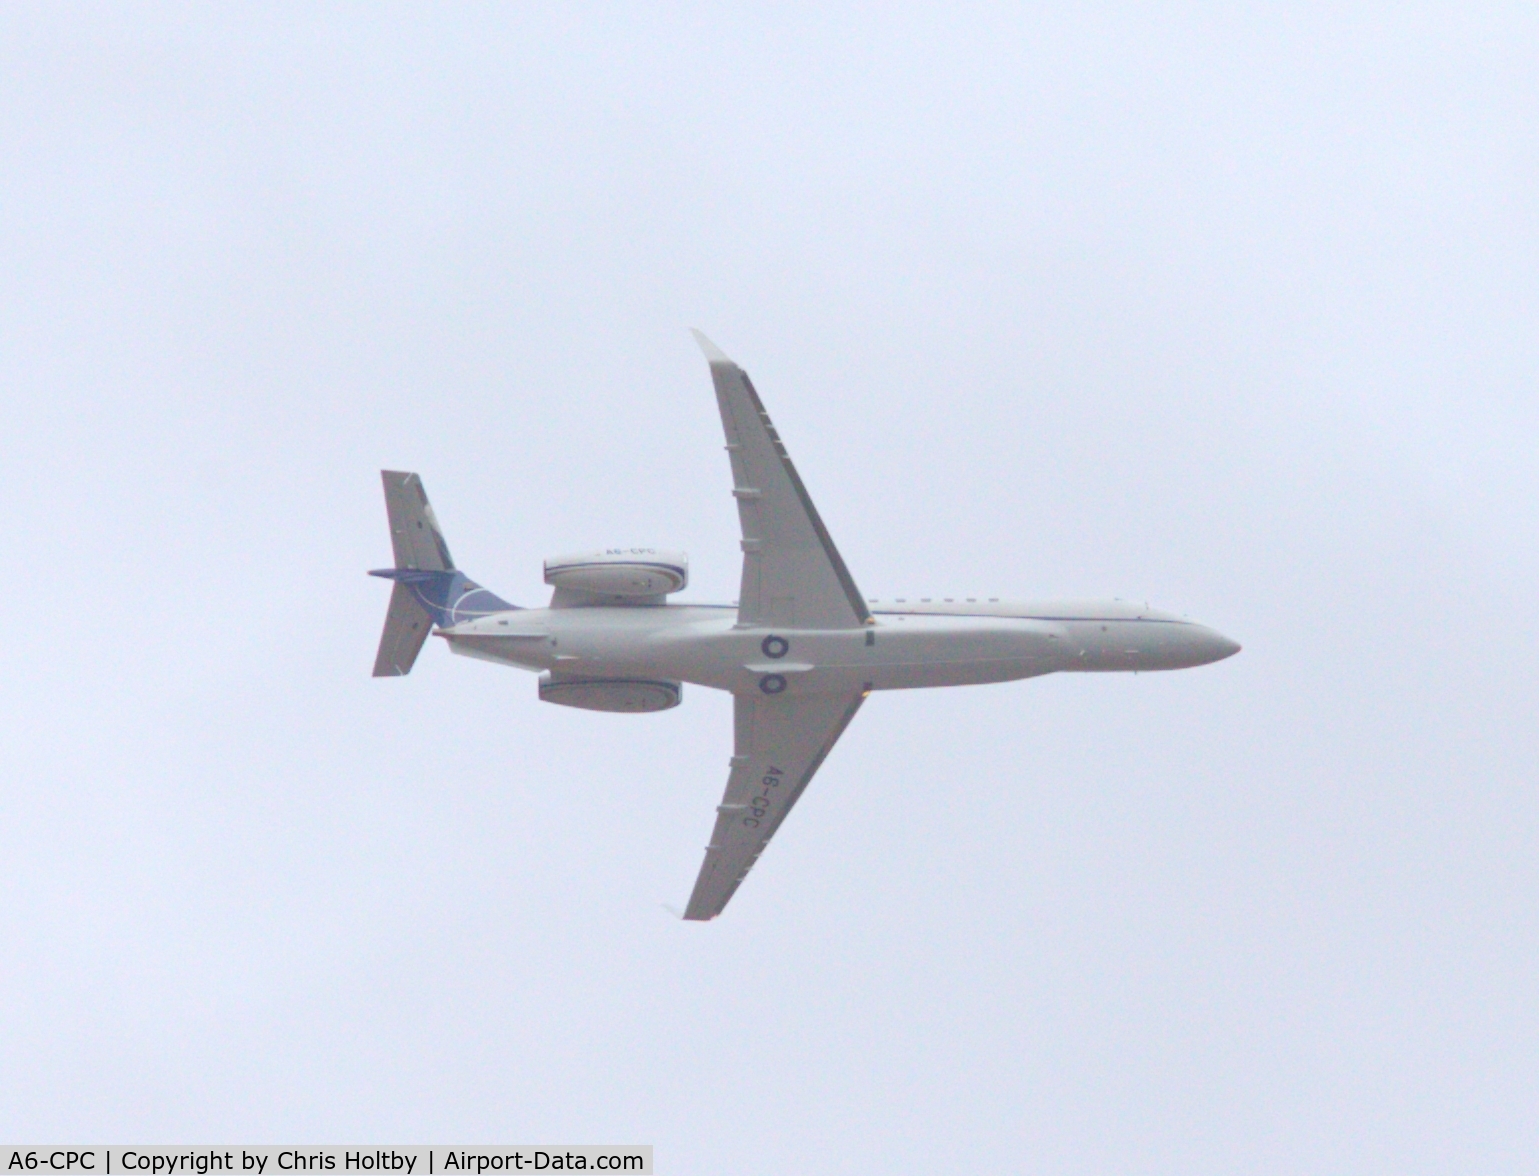 A6-CPC, 2006 Embraer EMB-135BJ Legacy 600 C/N 14500960, Over Ware, Herts on approach into Stansted Airport